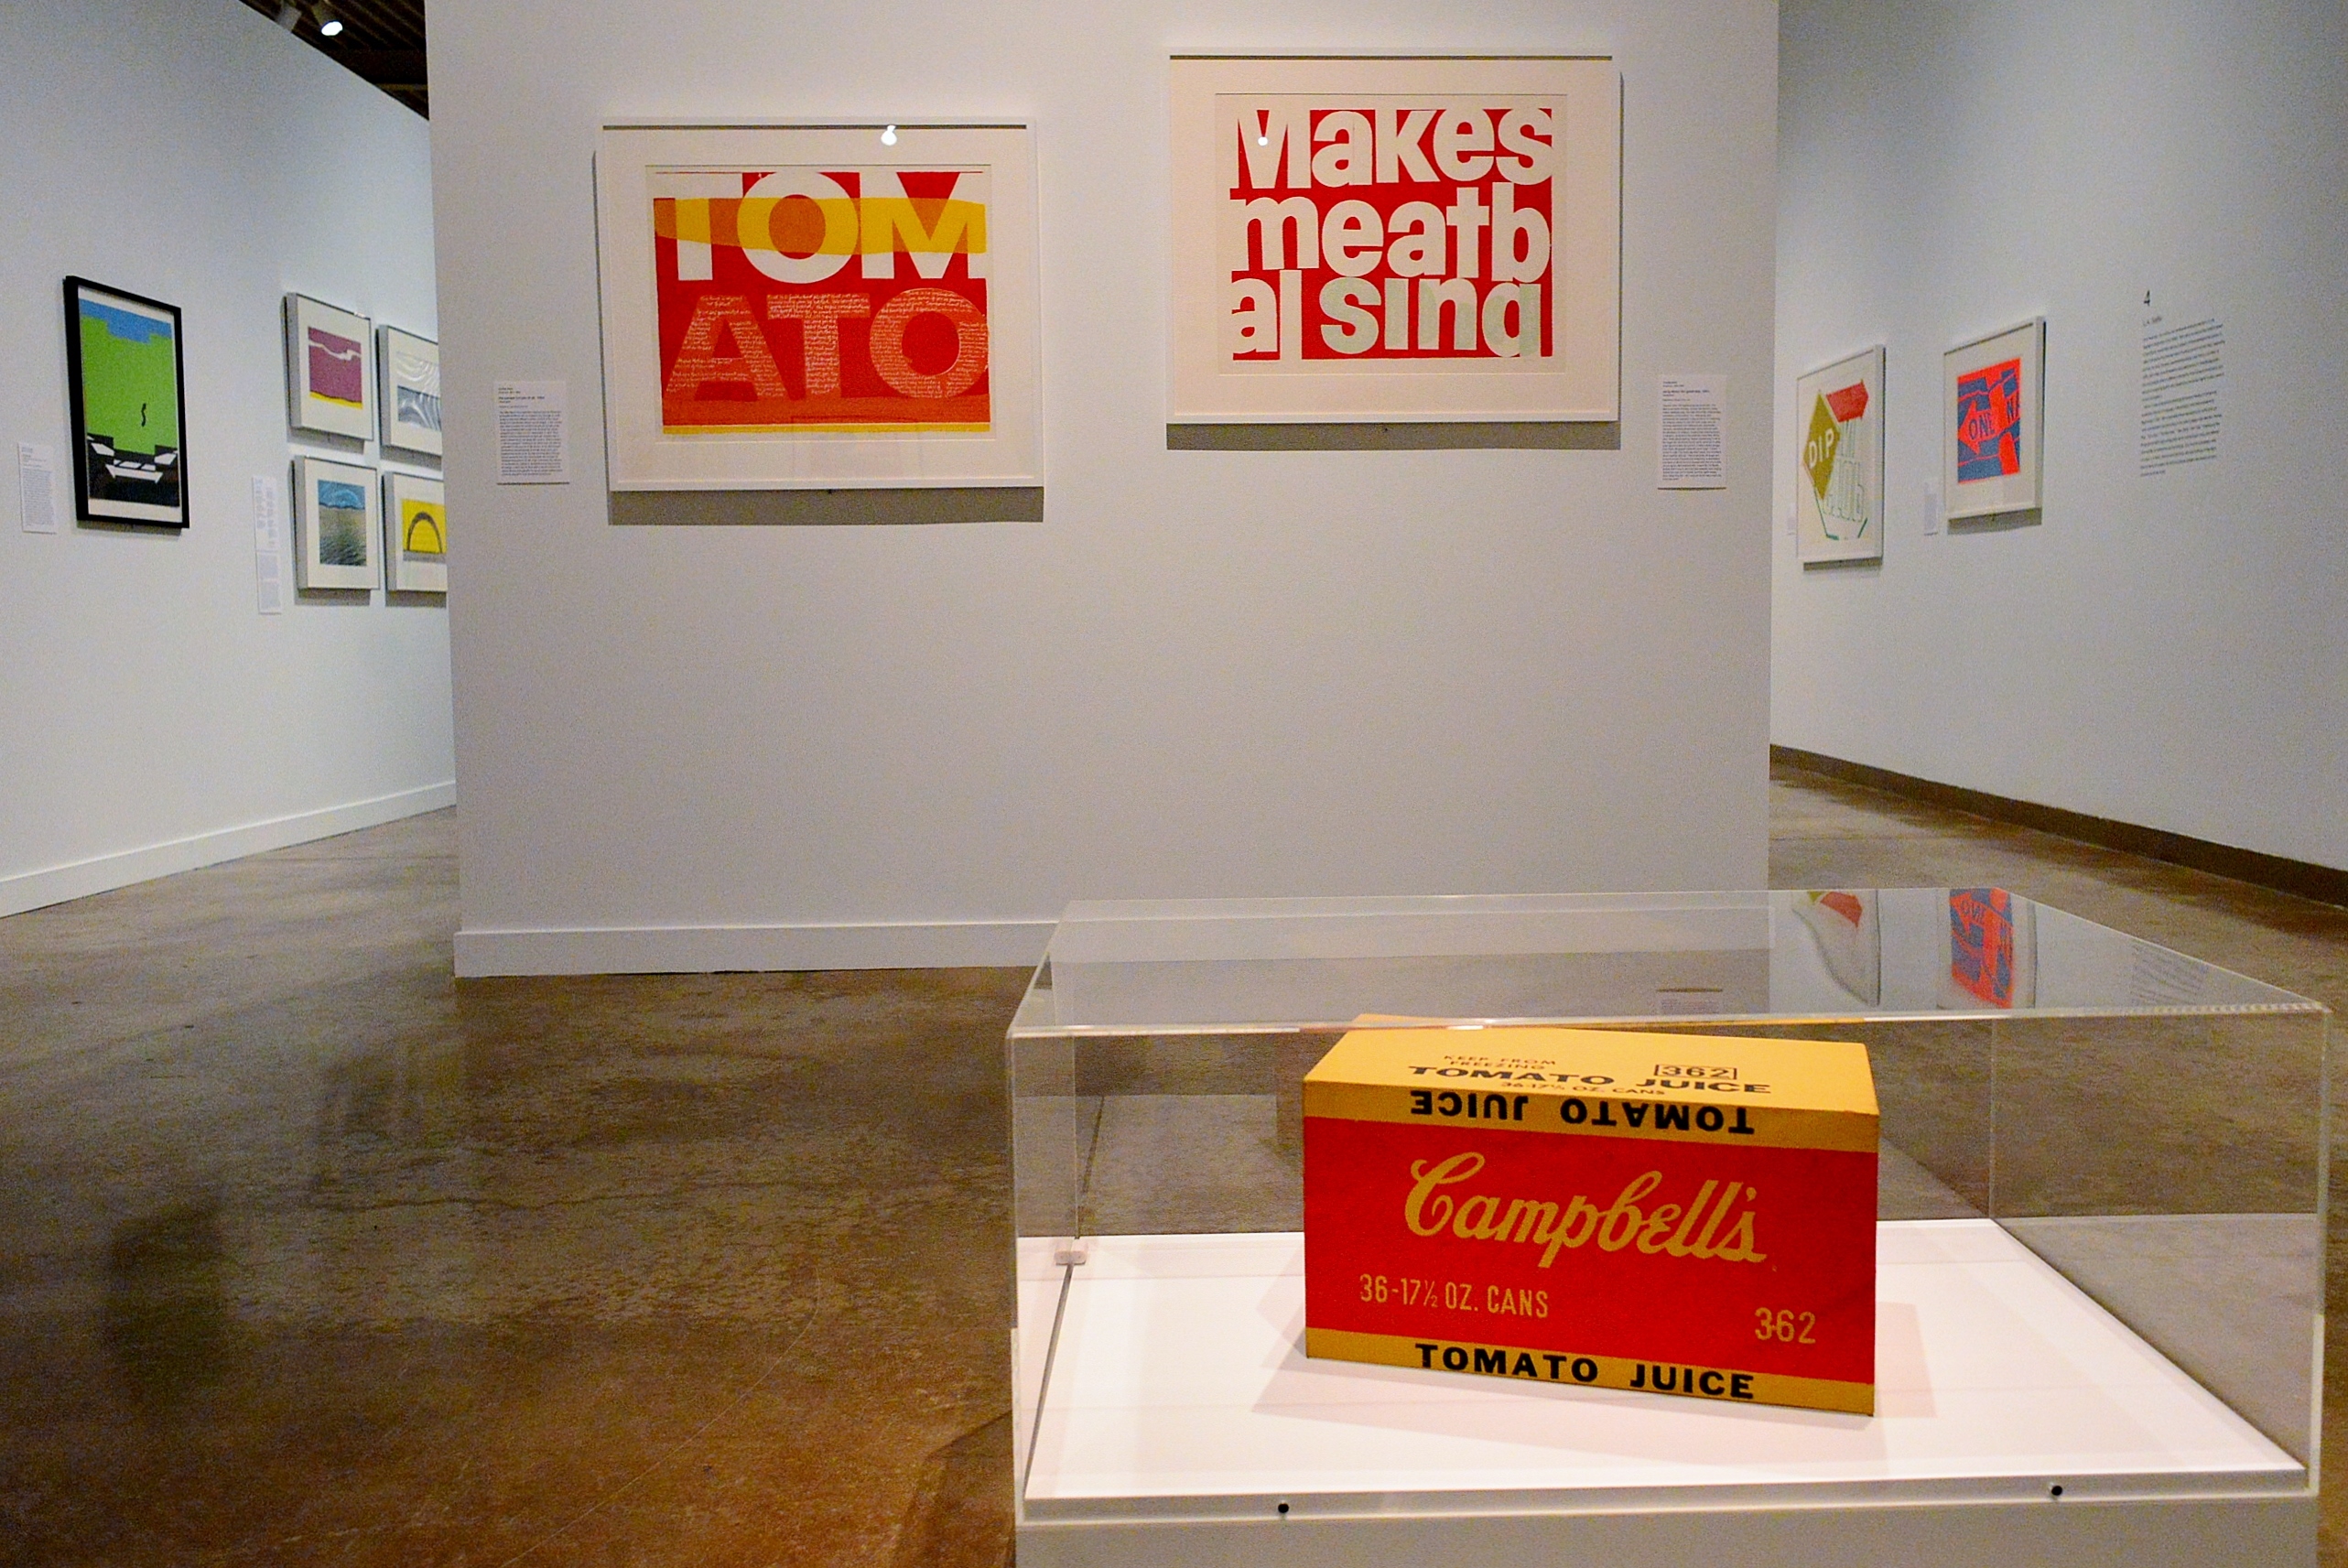 the juiciest tomato of all and song about the greatness (l-r) by Corita Kent. Andy Warhol’s Campbell’s Tomato Juice  Box (foreground)